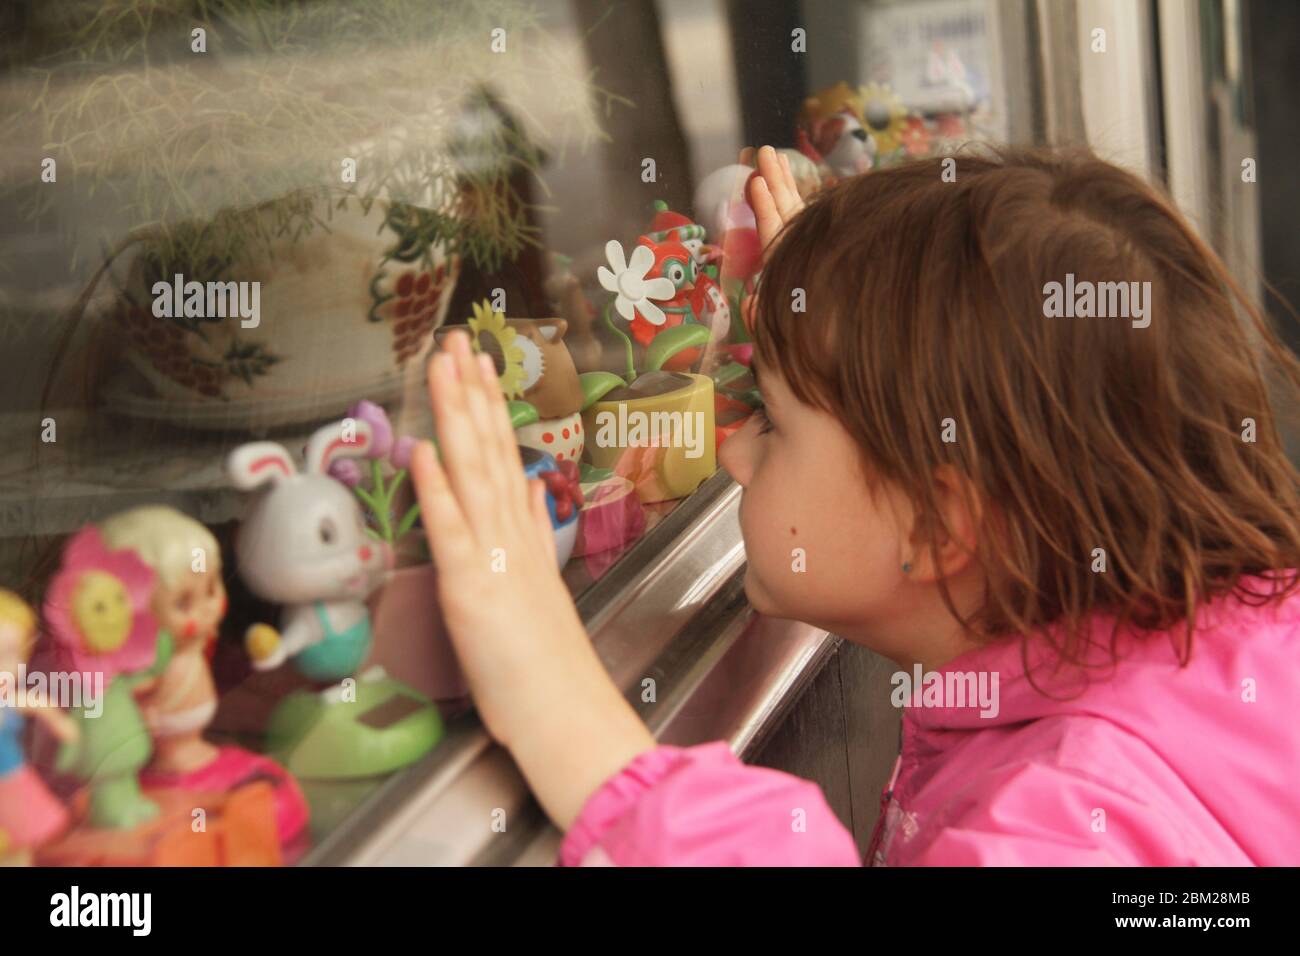 Young girl looking thought he window of a store to a solar powered small toys display Stock Photo